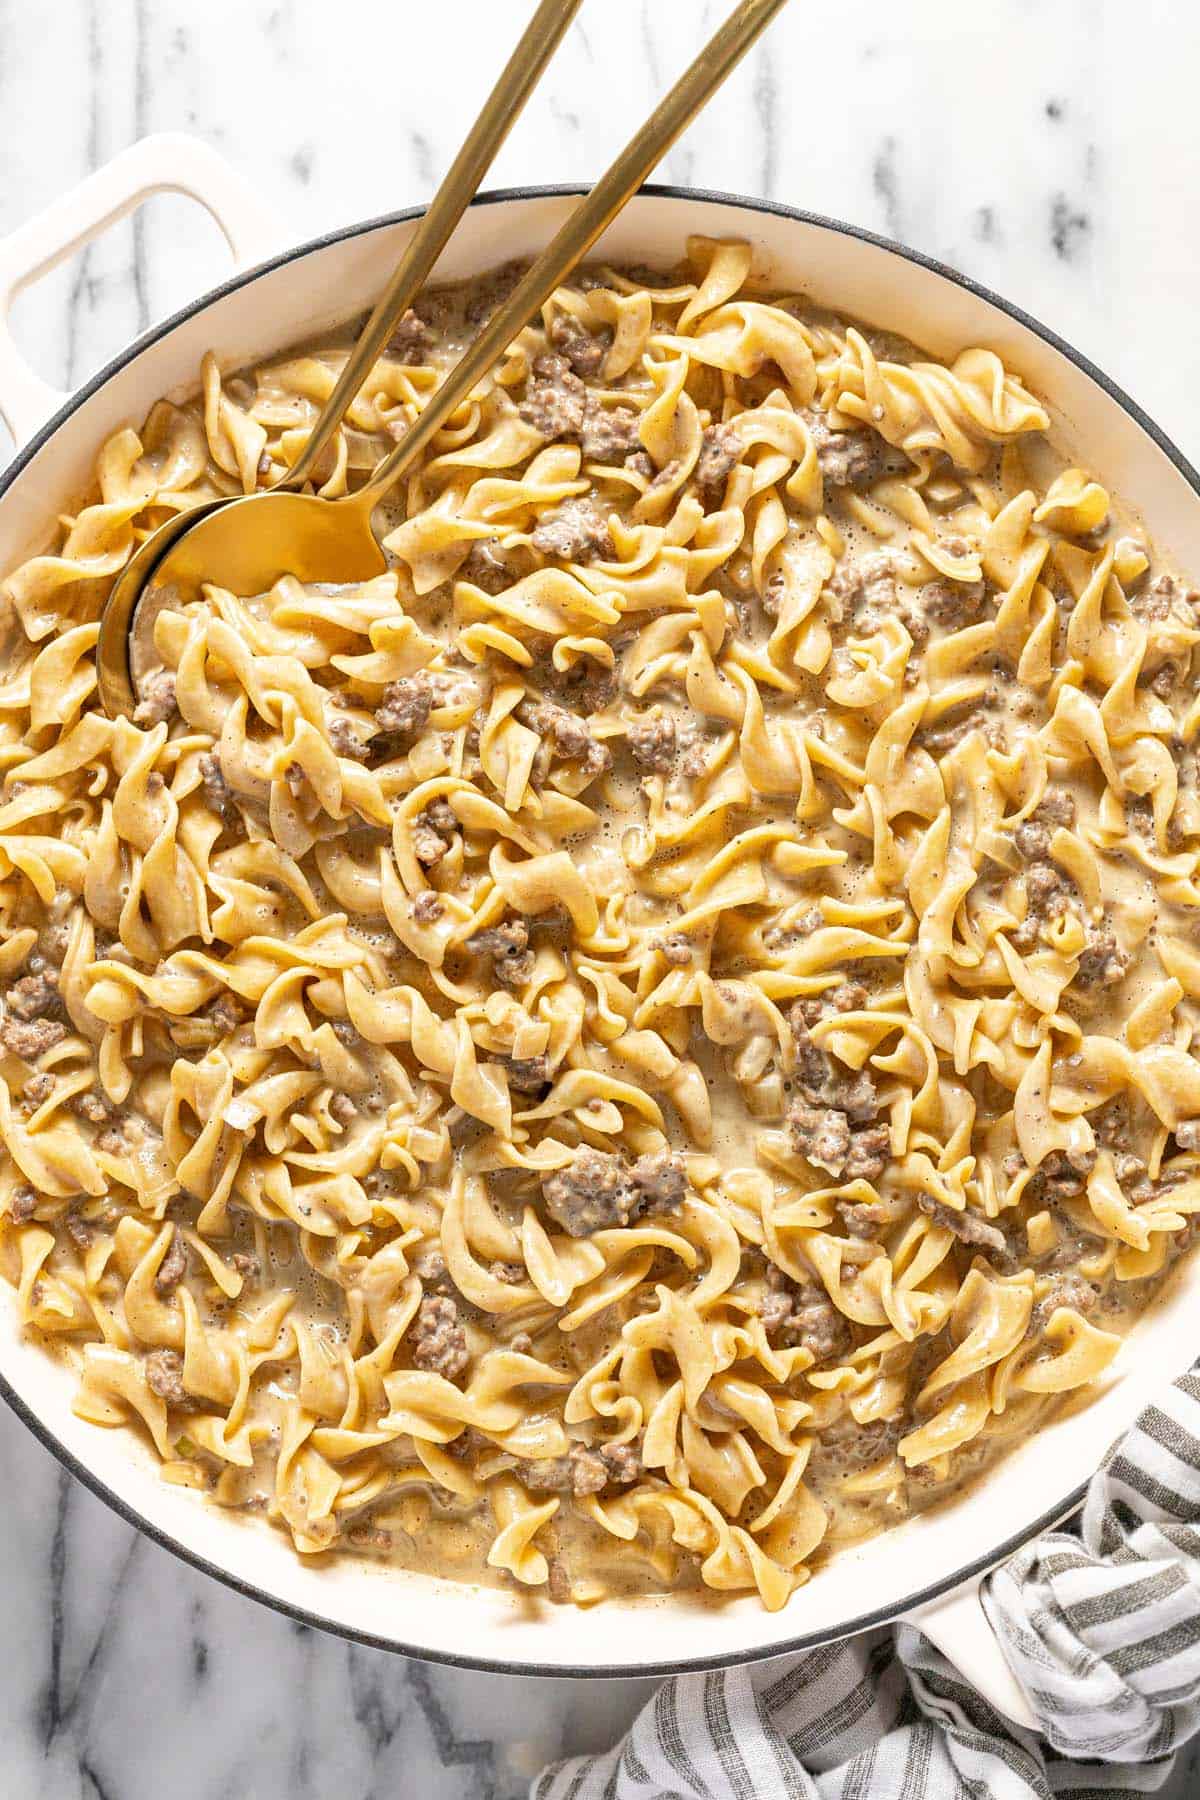 Large pan filled with creamy beef and noodles recipe.